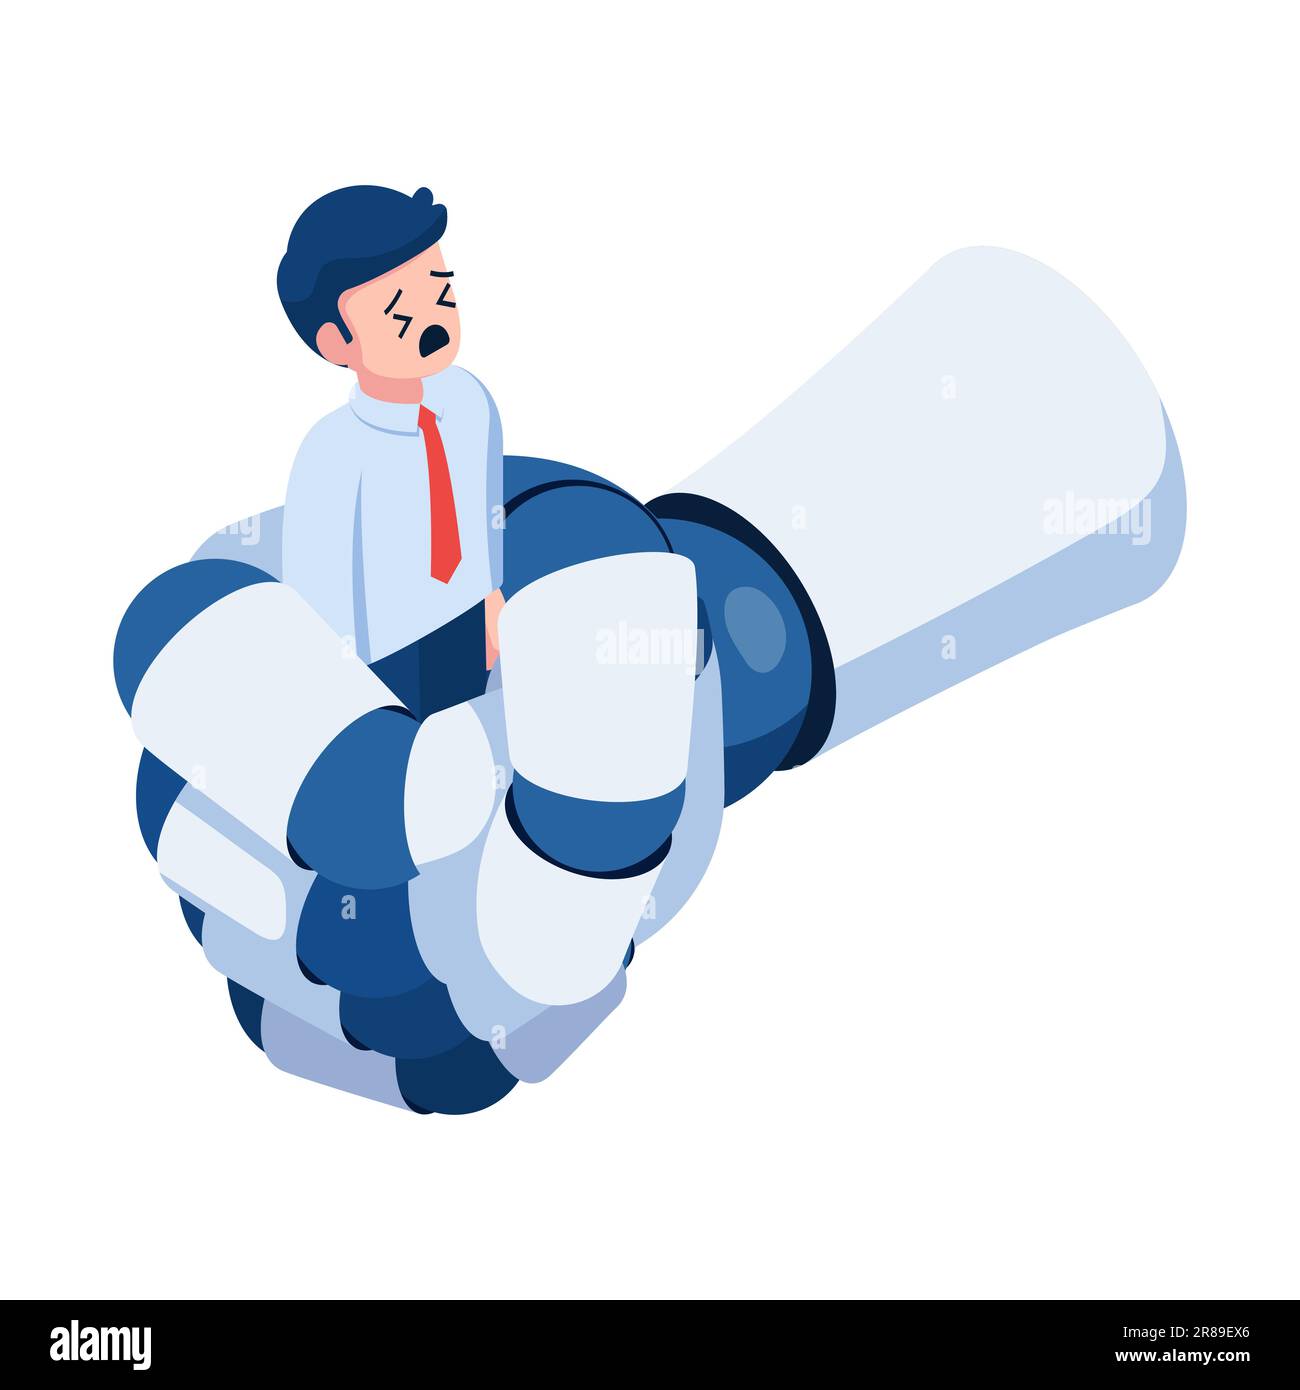 Flat 3d Isometric Businessman Being Squeezed by Ai Robot Hand. Human Being Replaced by AI Robots in The Future Concept. Stock Vector